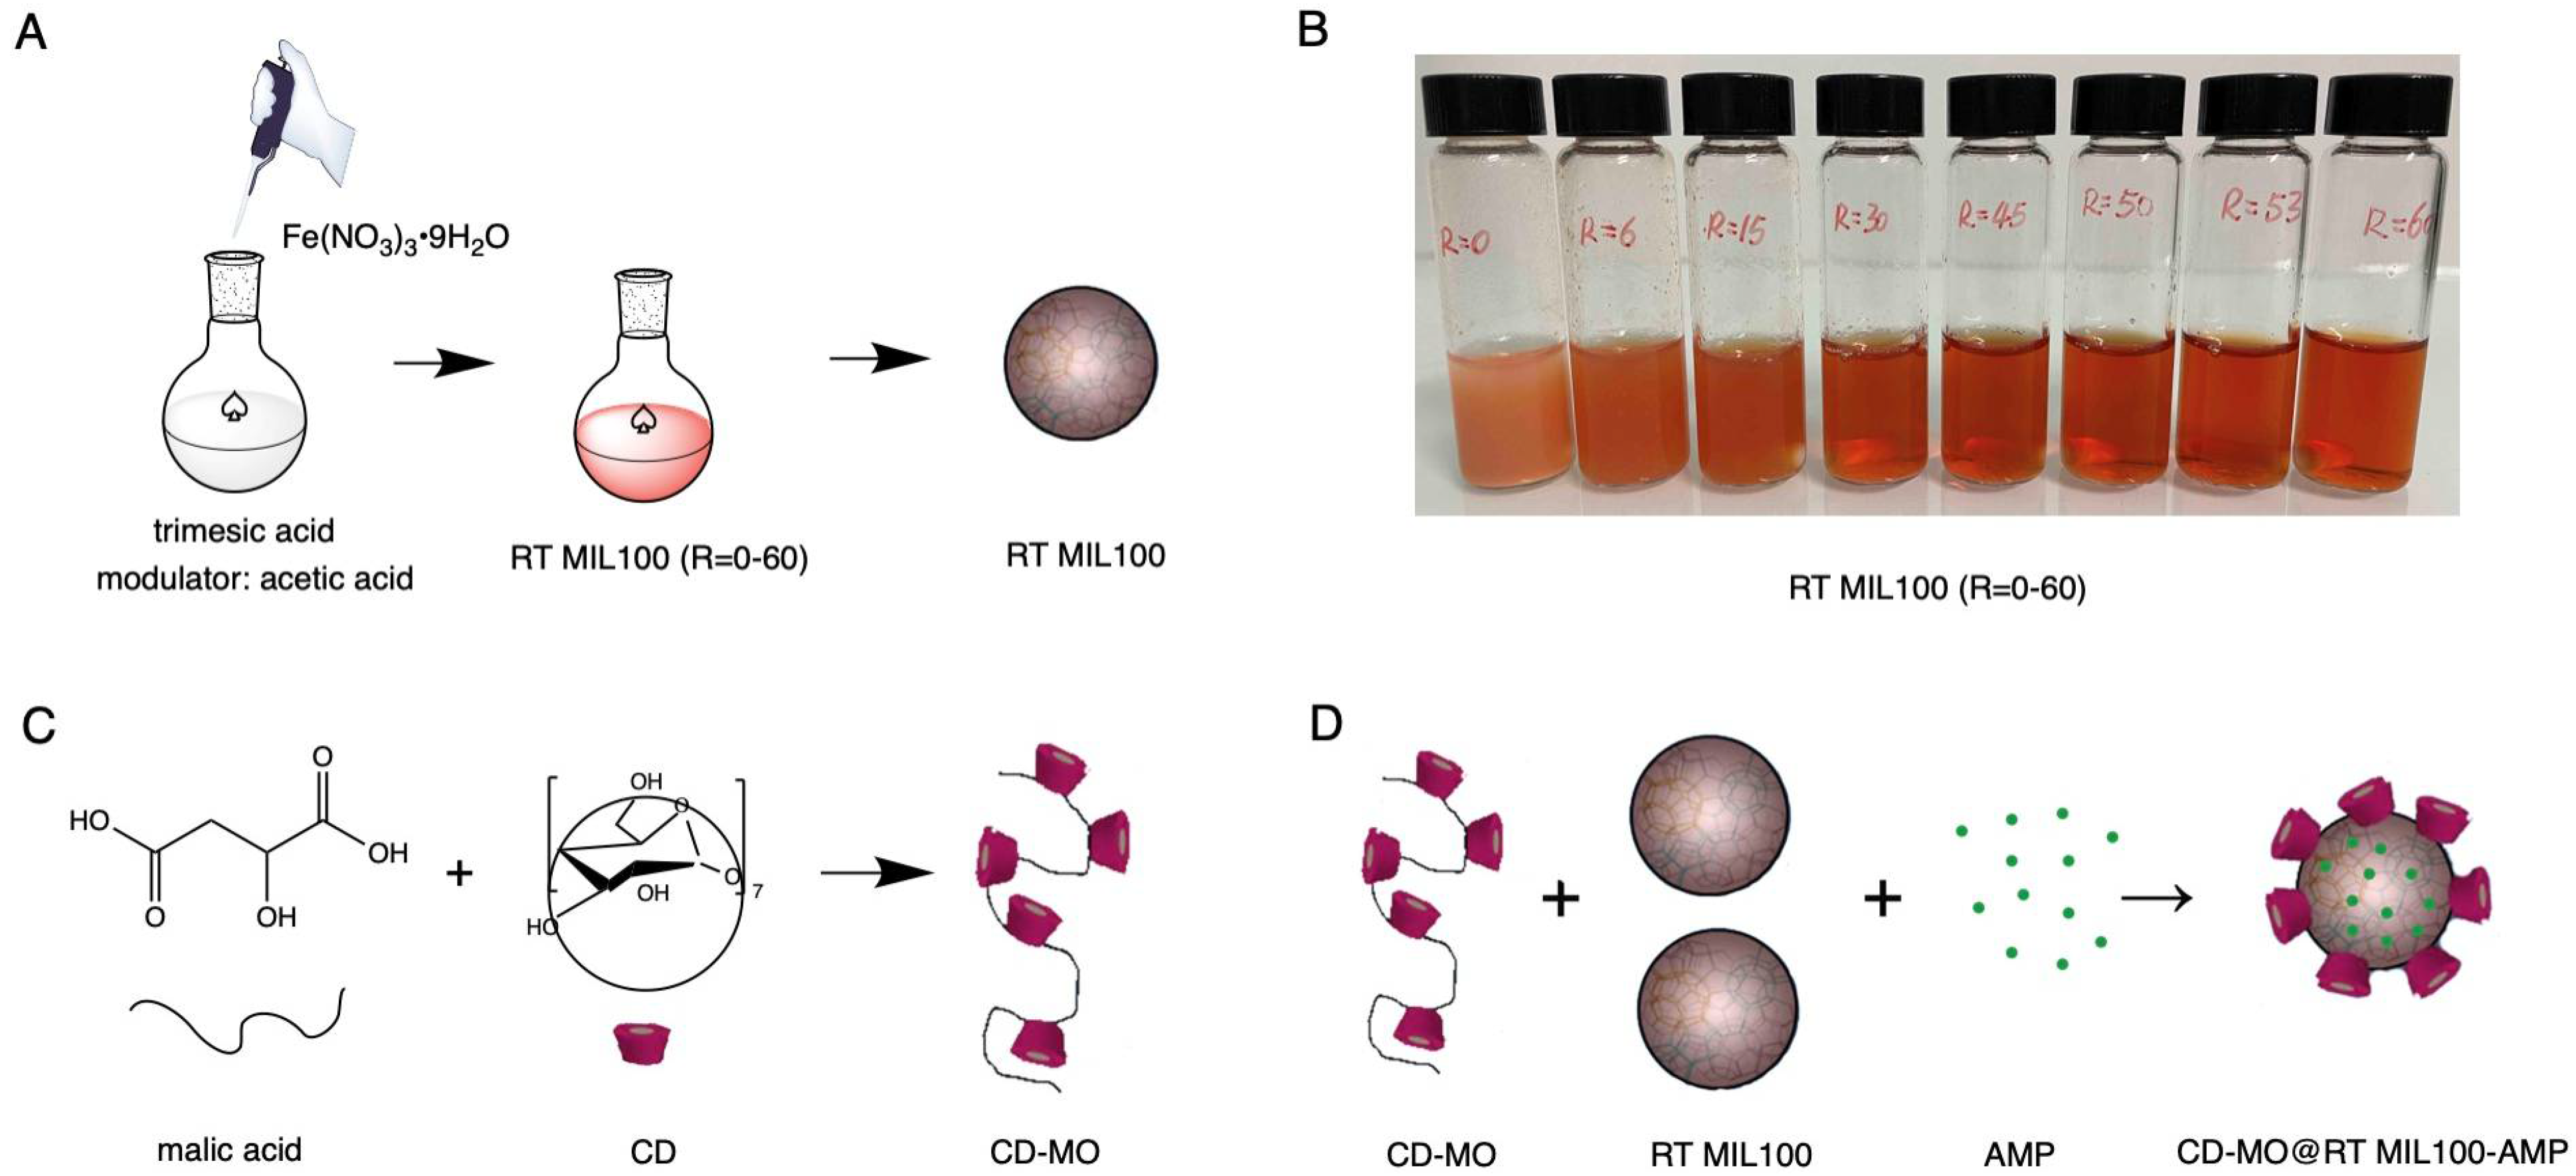 IJMS | Free Full-Text | Acetic Acid-Modulated Room Temperature Synthesis of  MIL-100 (Fe) Nanoparticles for Drug Delivery Applications